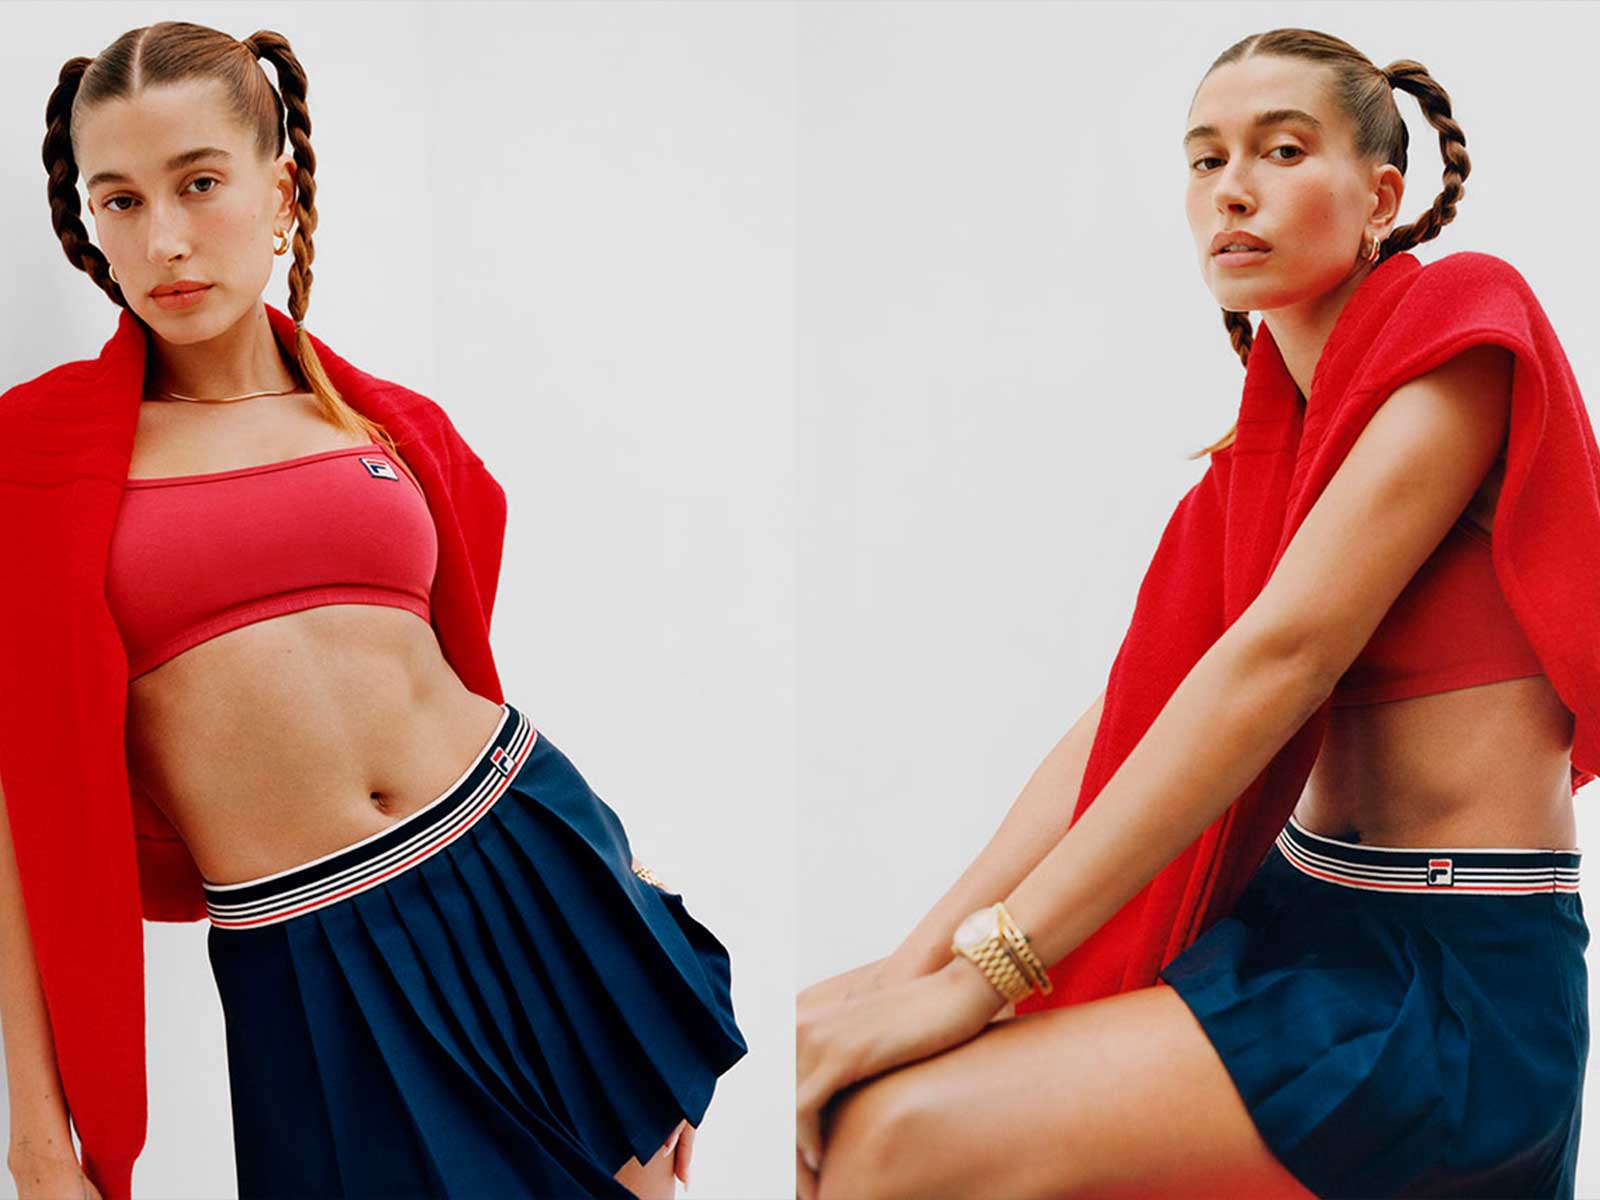 The second collaboration between Hailey Bieber and FILA